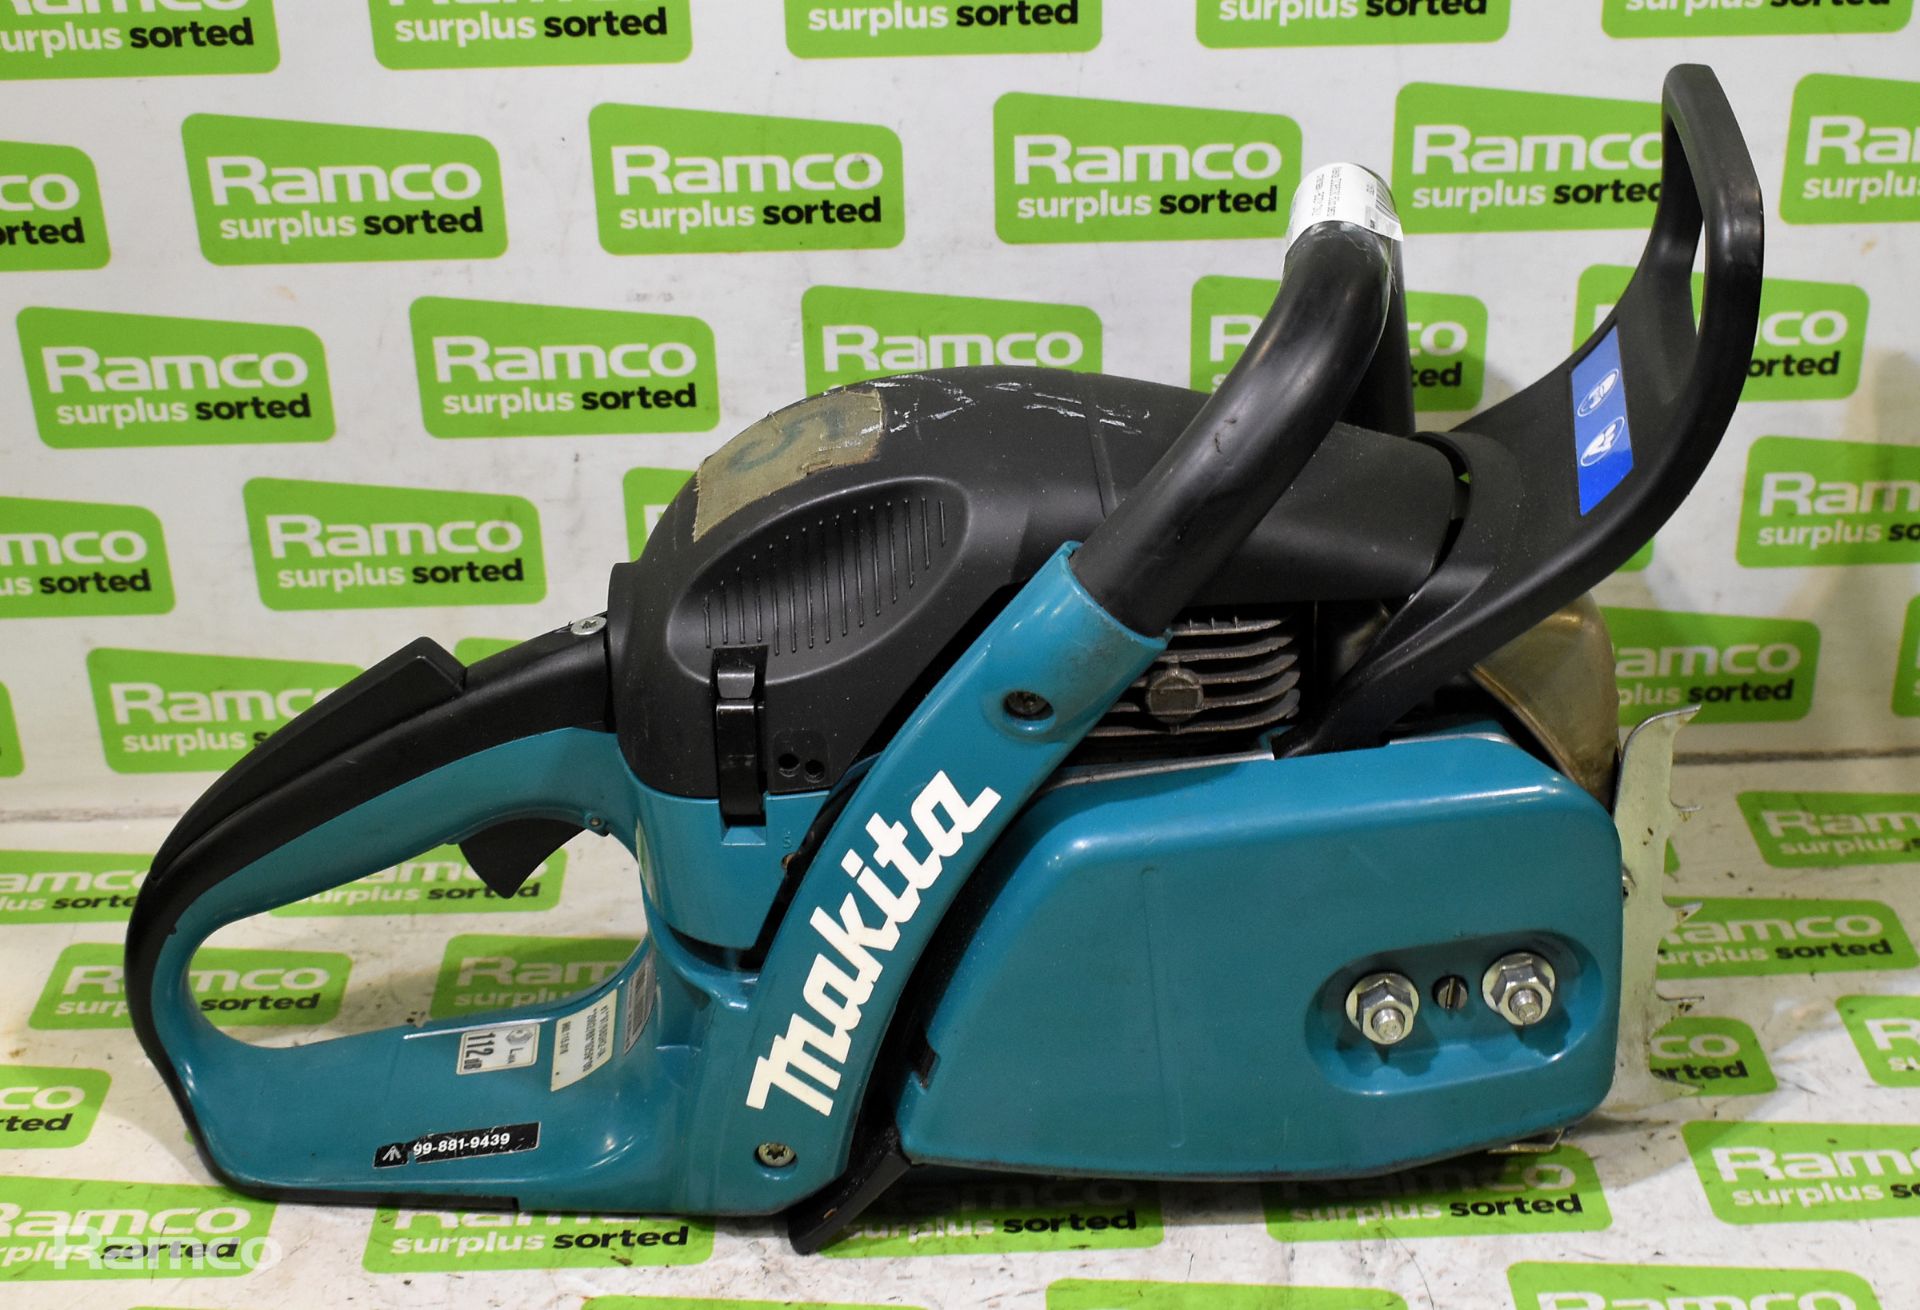 3x Makita DCS5030 50cc petrol chainsaw - BODIES ONLY - AS SPARES AND REPAIRS, 1x Makita EA5000P - Image 8 of 22